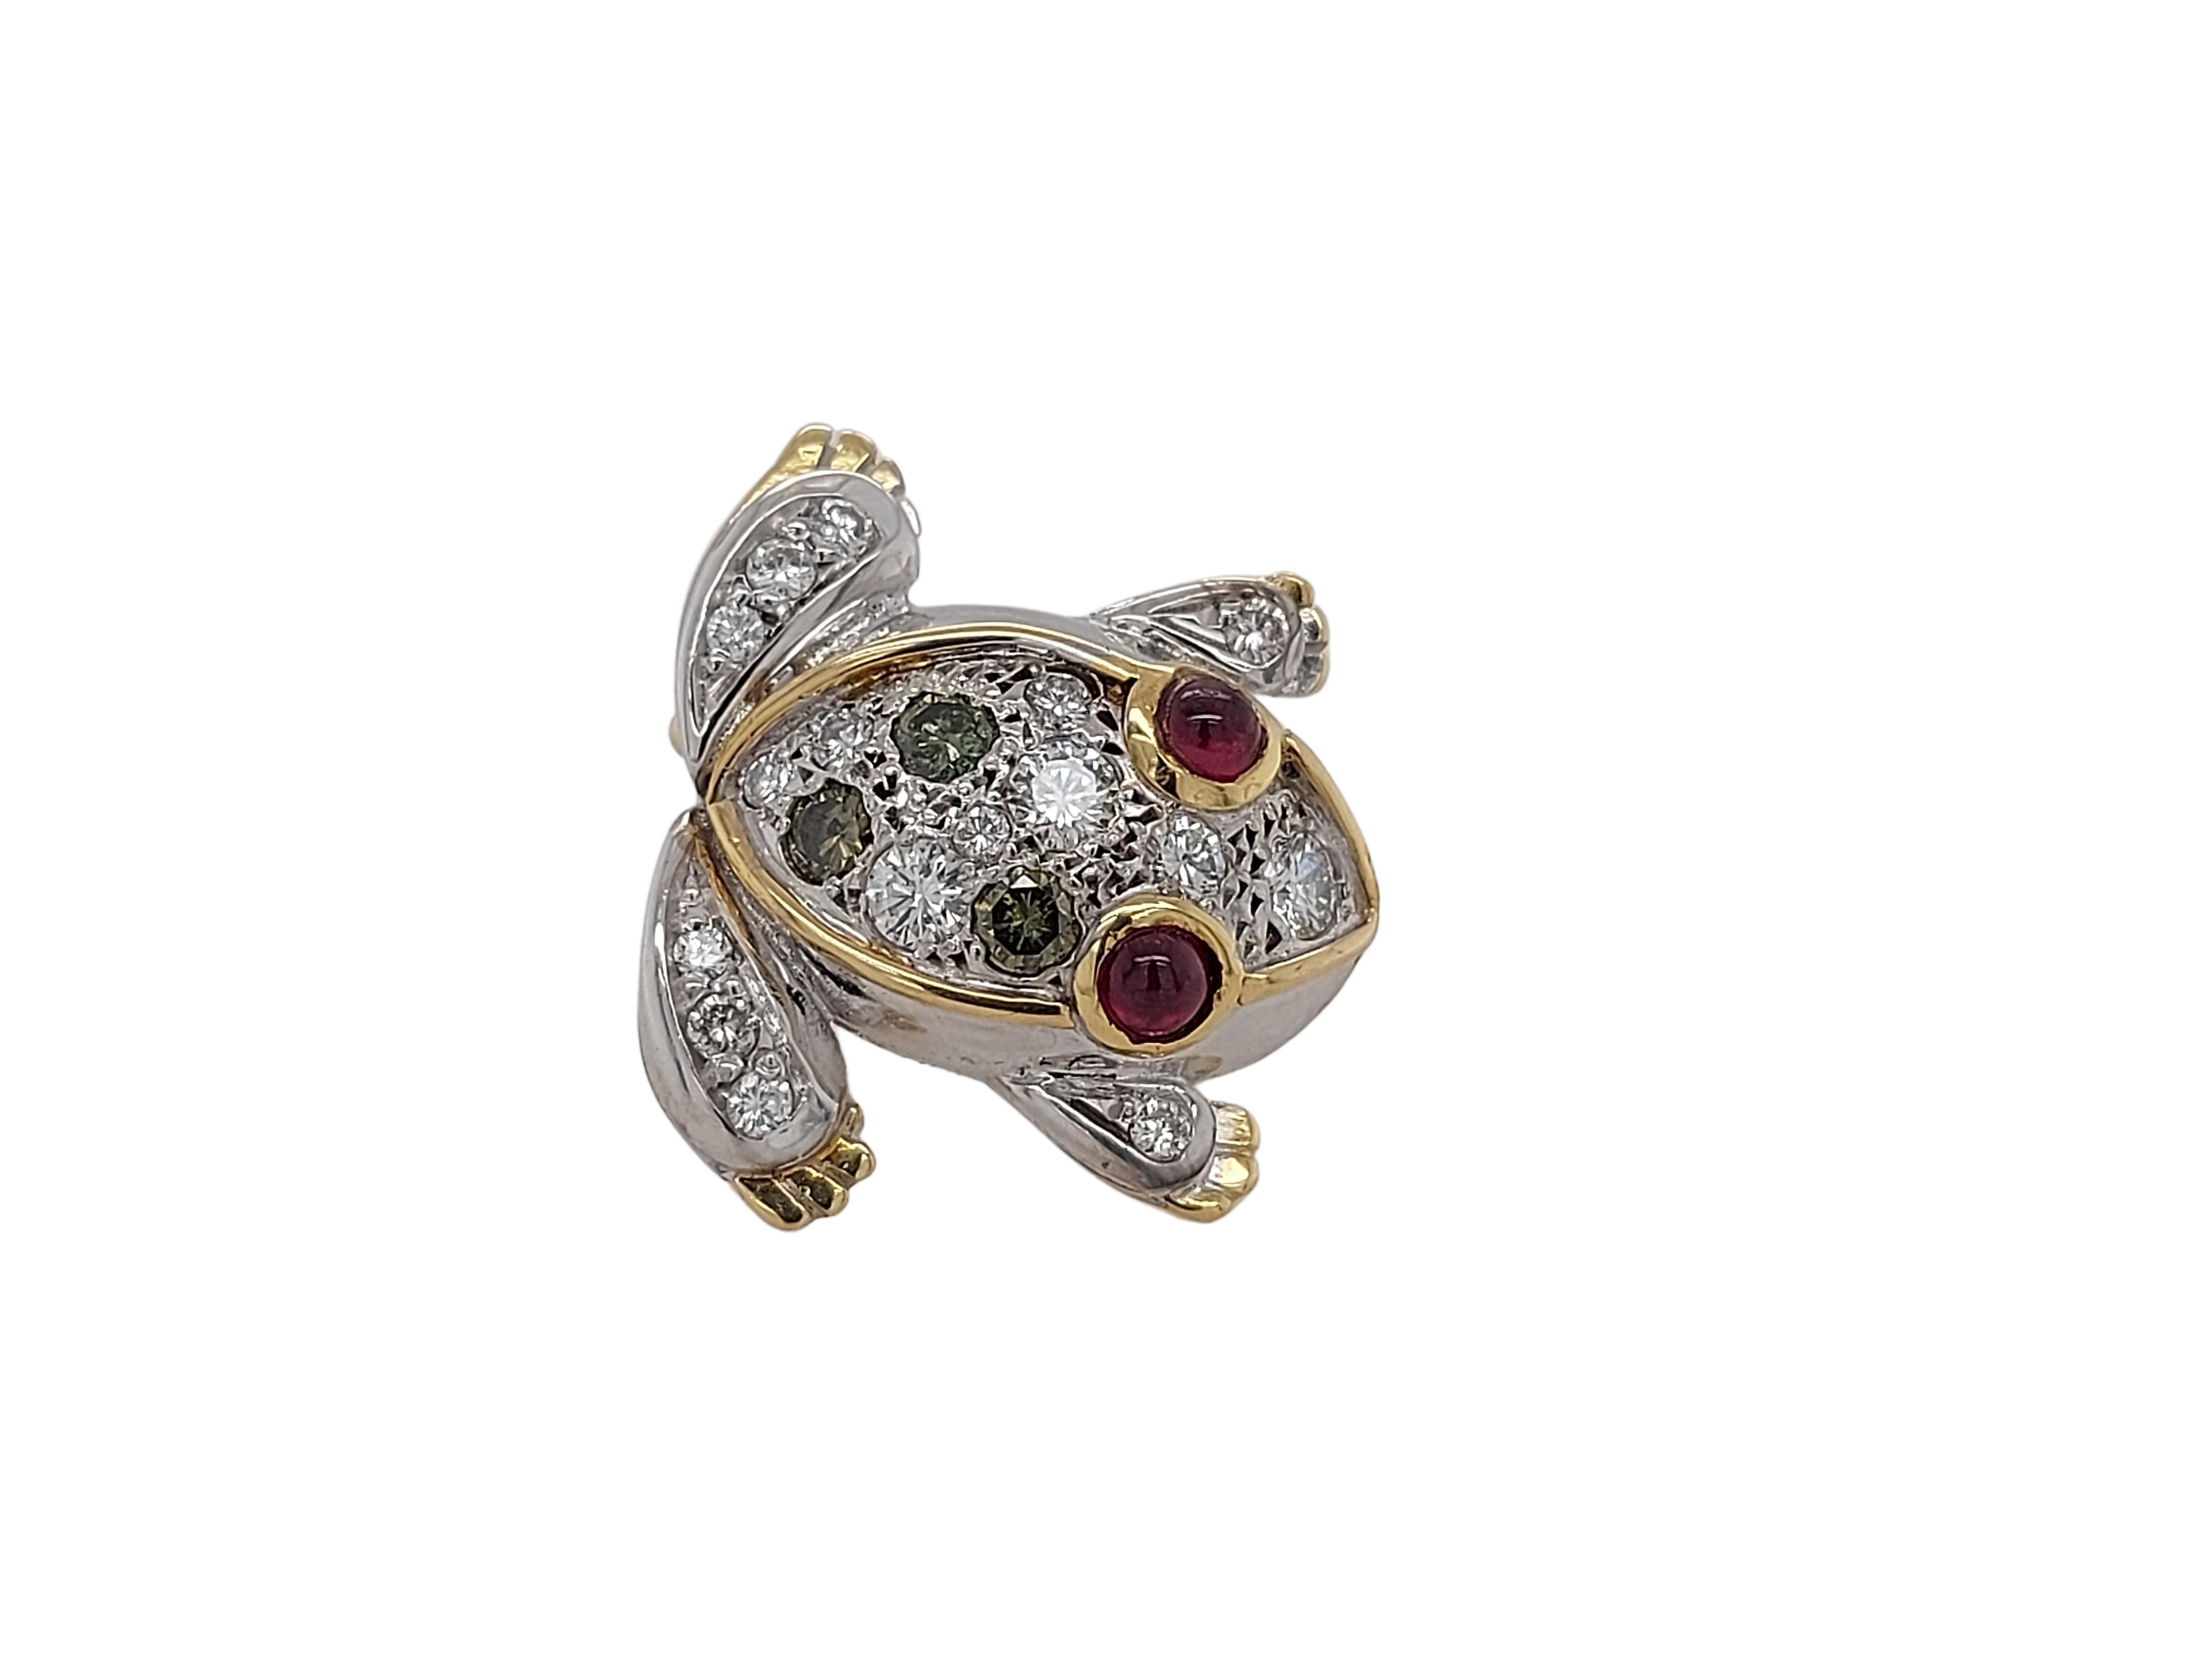 Original 18kt Yellow & White Gold Frog Brooch set with Diamonds & Rubies  

Diamonds: 19 brilliant cut diamonds

Ruby: 2 cabochon ruby 

Material: 18 kt yellow and white gold

Measurements: 21 mm x 18.5 mm

Total weight: 6.4 grams / 4.1 dwt / 0.225